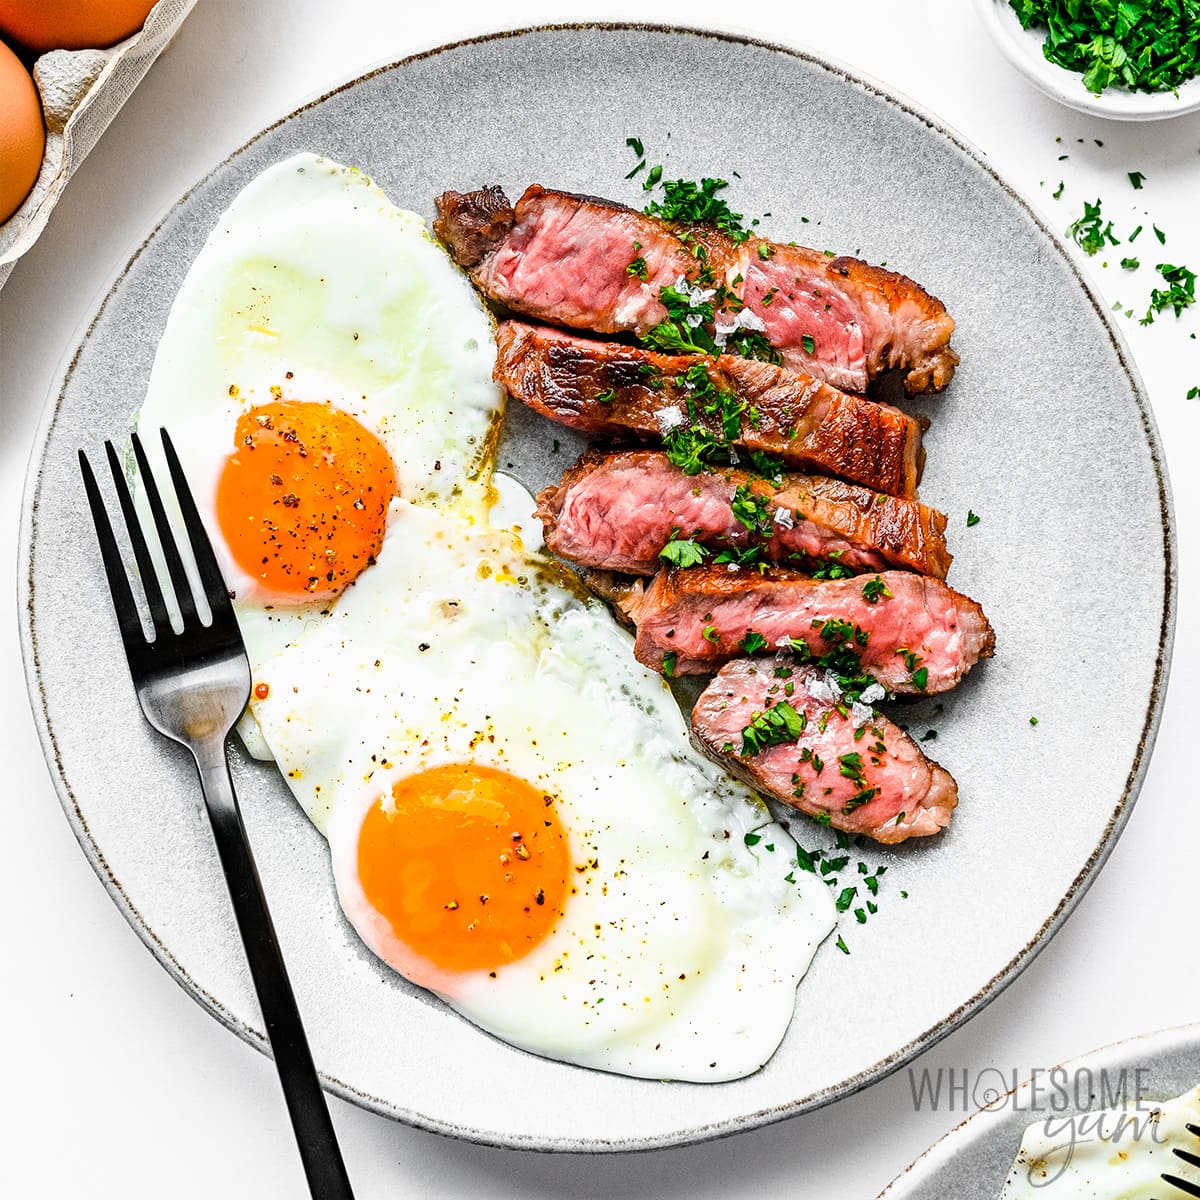 Steak and eggs on a plate.